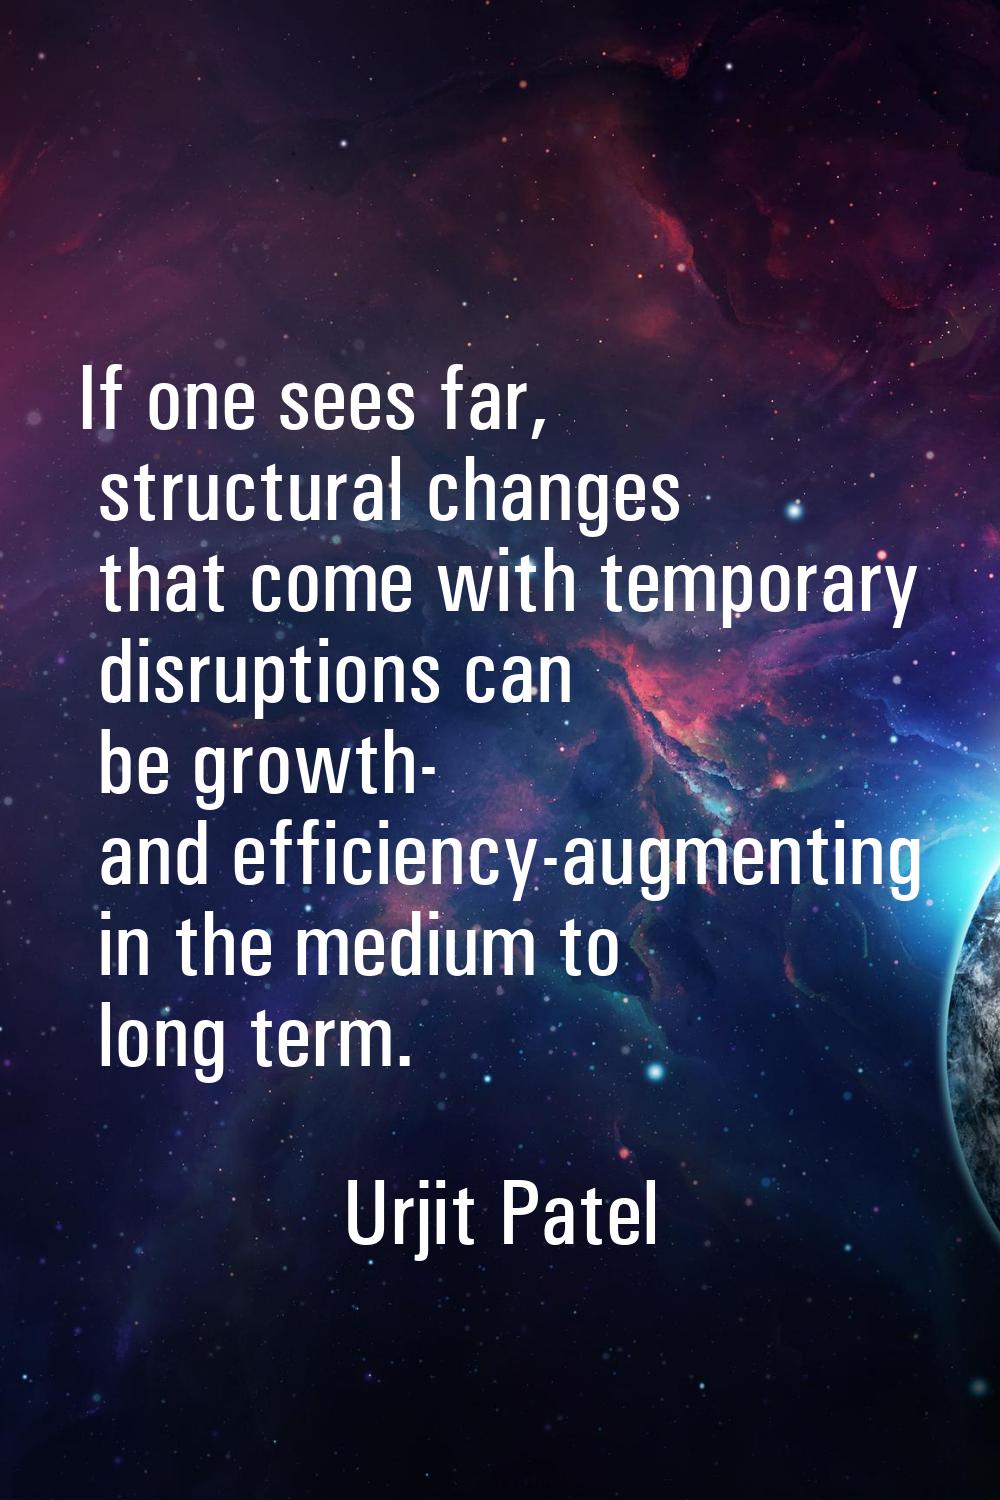 If one sees far, structural changes that come with temporary disruptions can be growth- and efficie